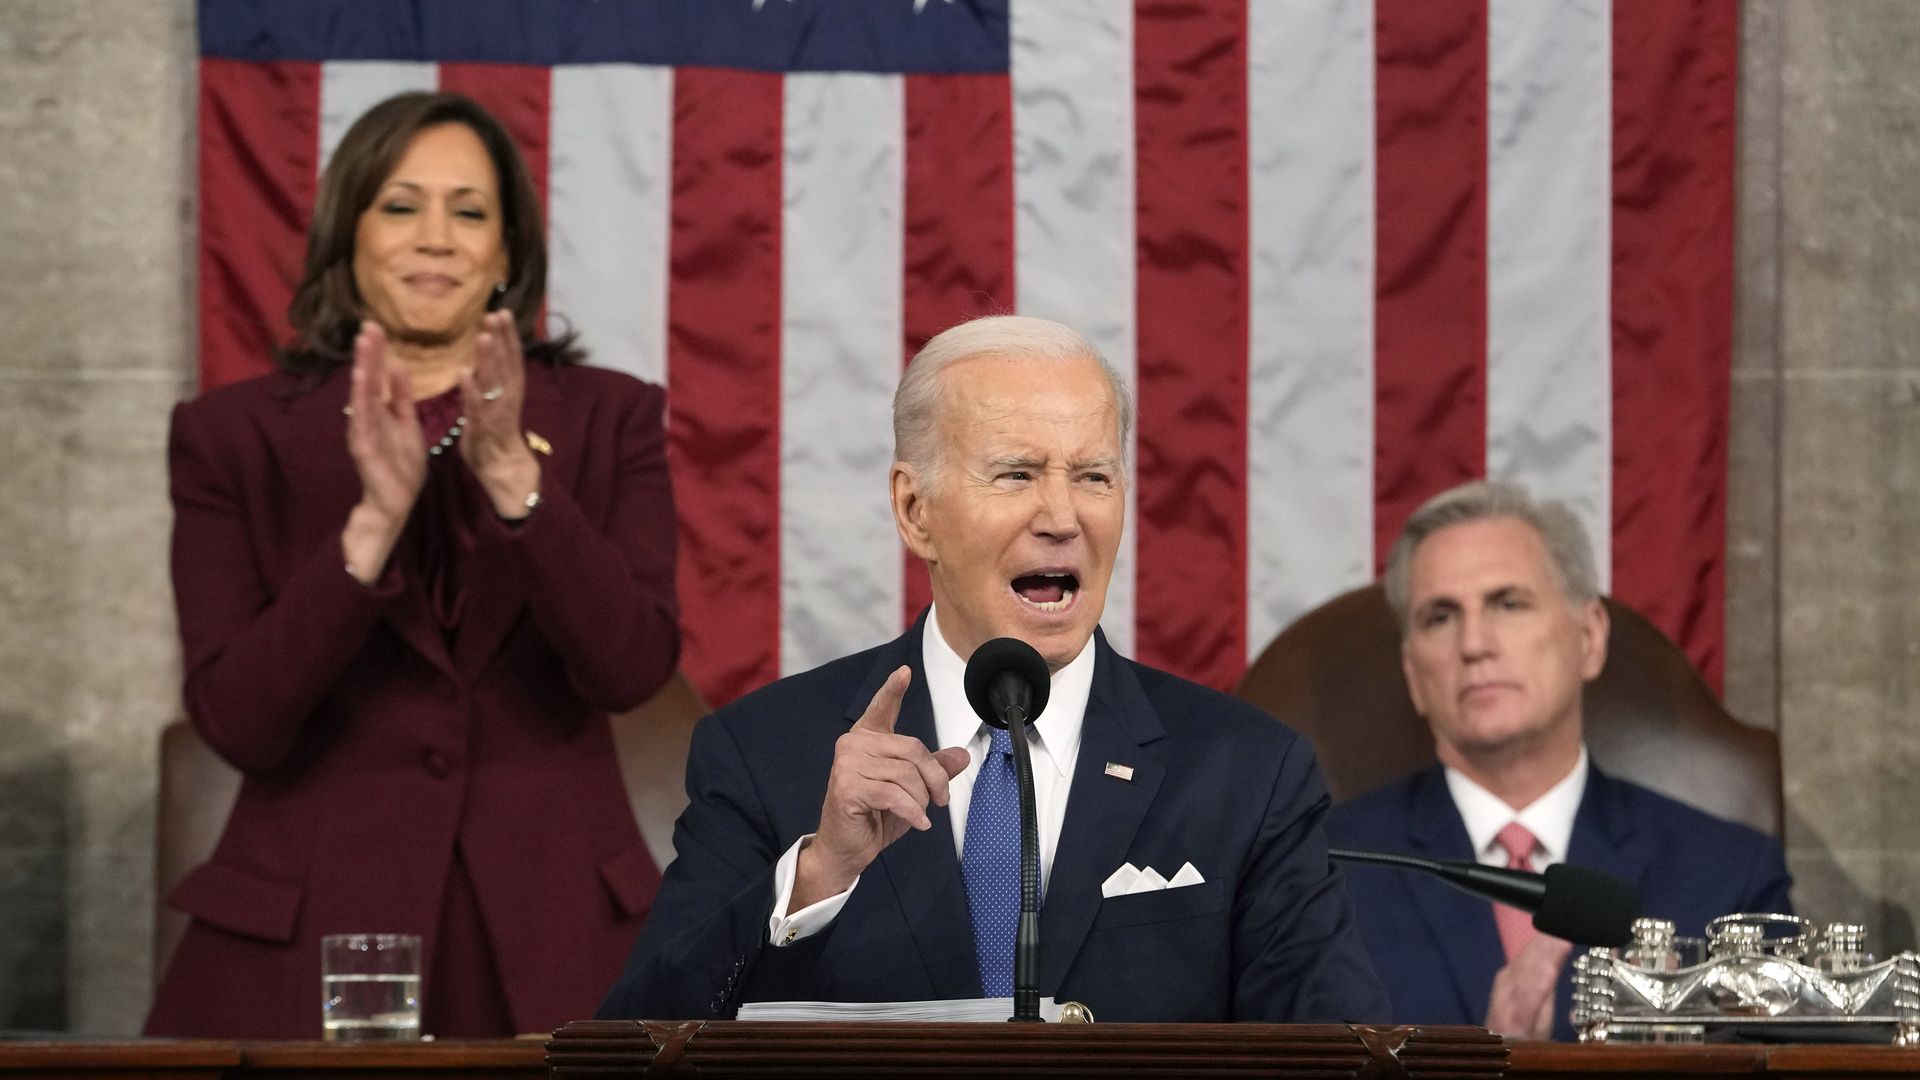 Joe Biden points his finger at the sky in an angry gesture in the House of Representatives